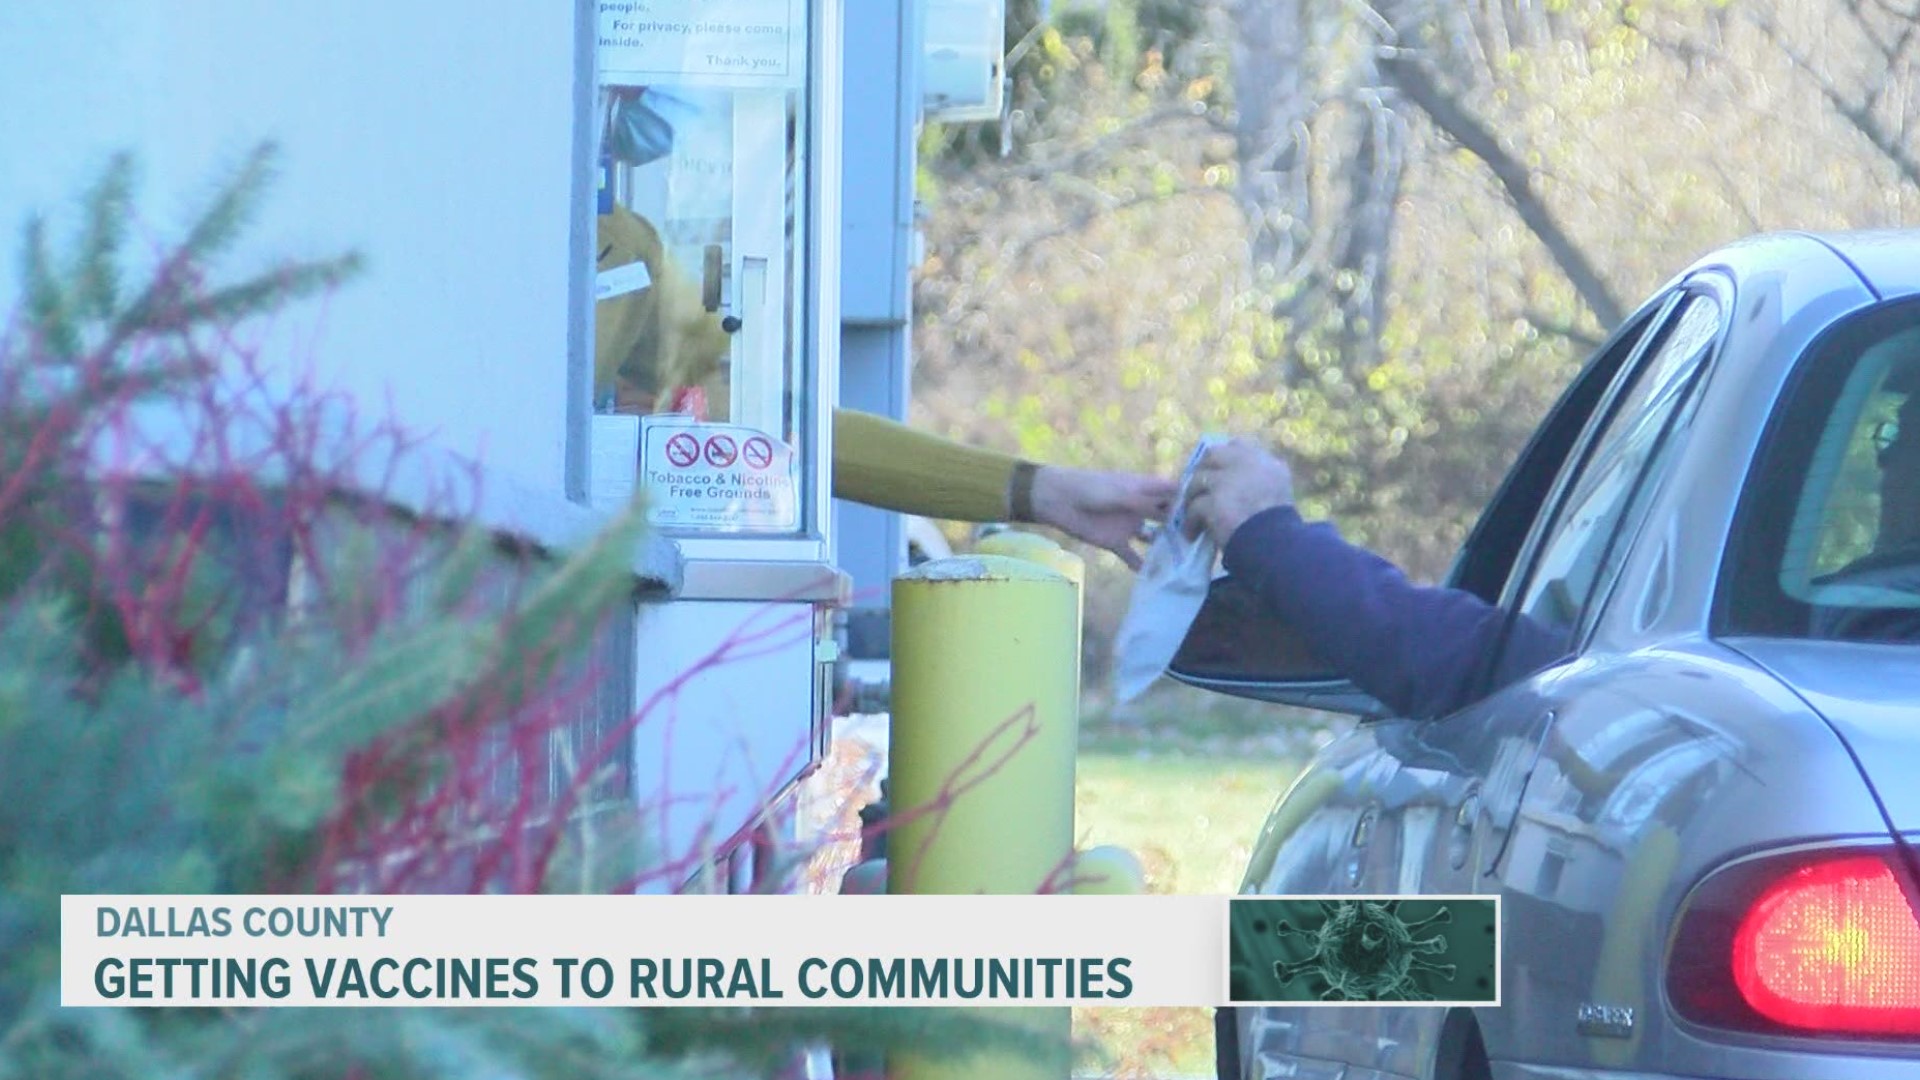 Pharmacies play a critical role in getting vaccines to rural communities.